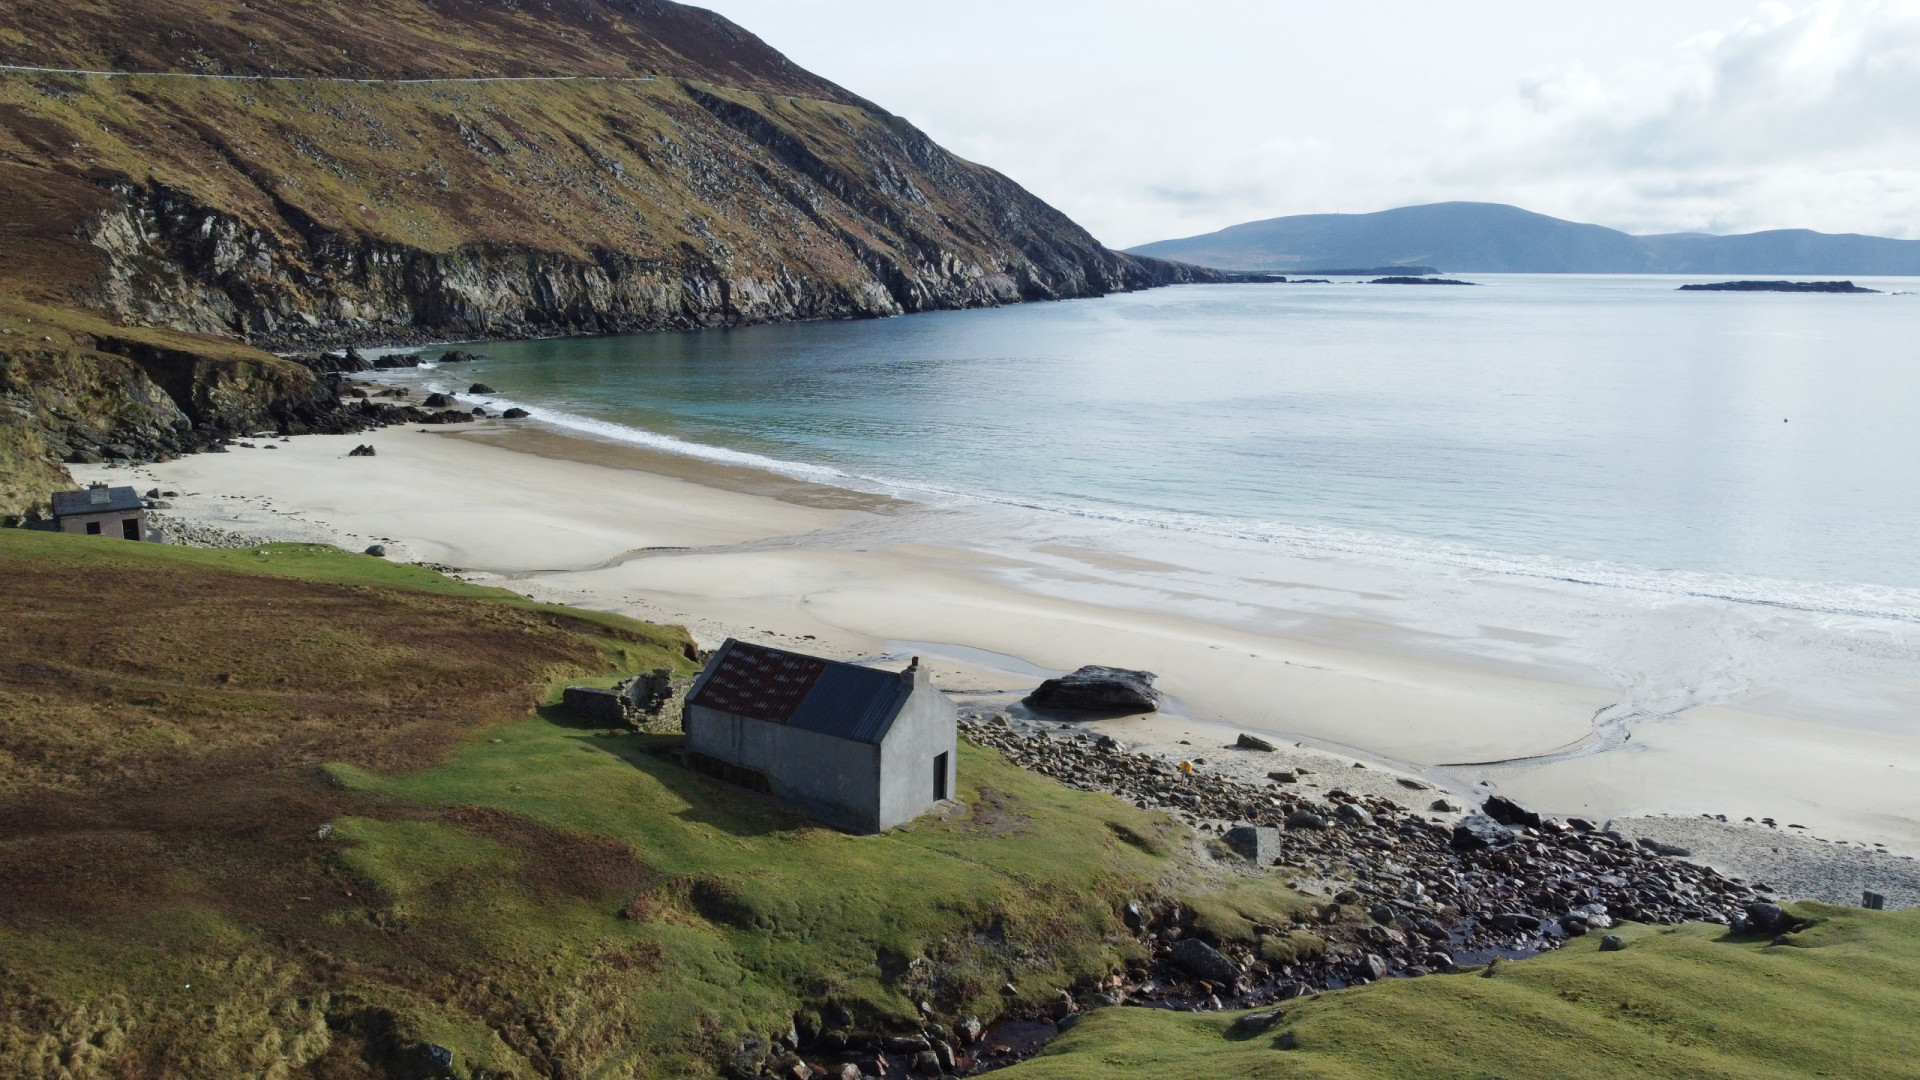 <p>Home to 2,500 residents, Achill is the largest inhabited island off the Irish coast. It's a favorite among artists and photographers, thanks to its dramatic scenery.</p>